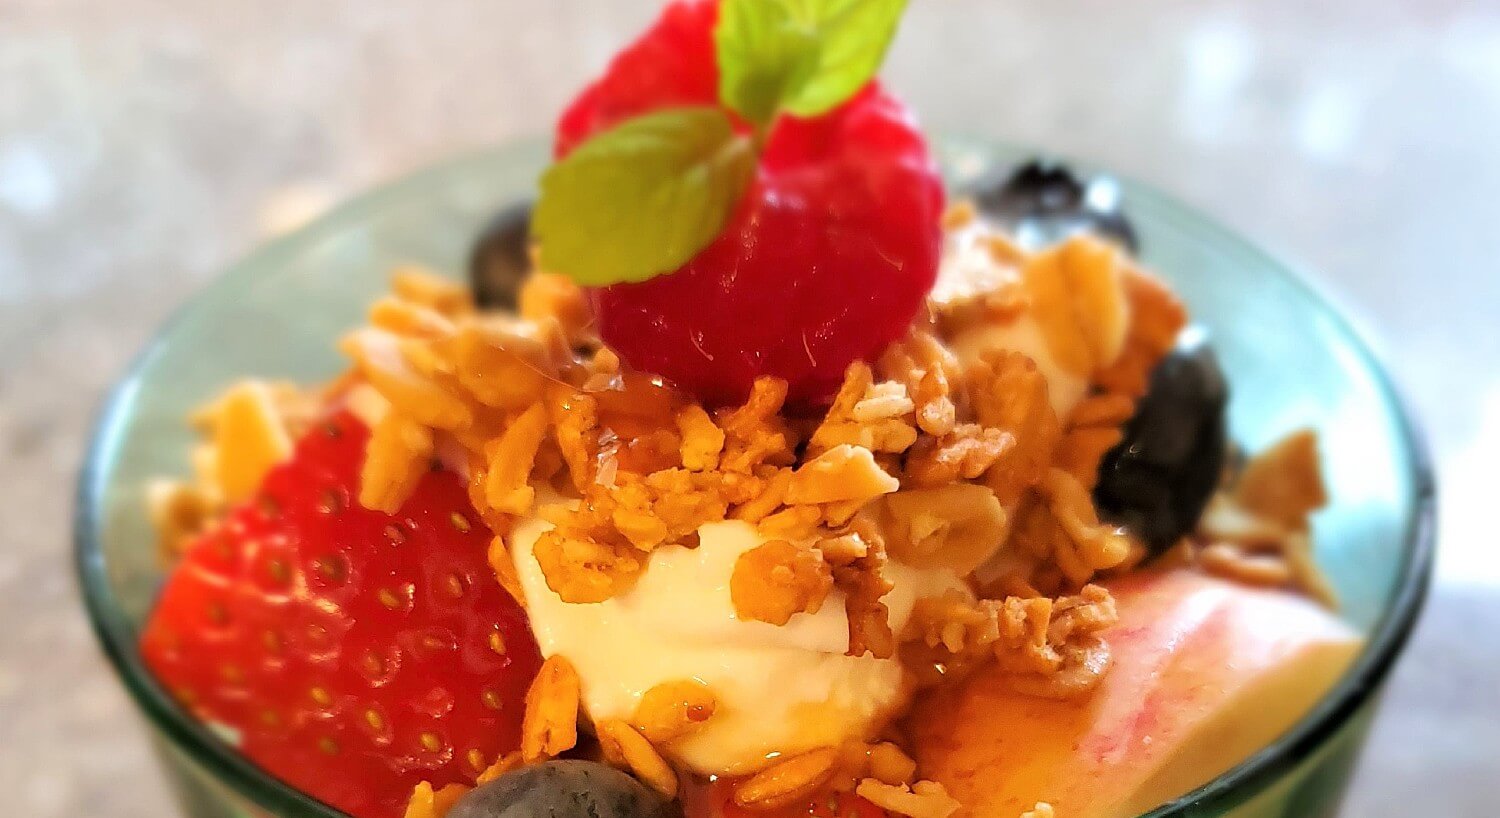 Glass dish filled with fruit, yogurt and topped with golden brown granola 